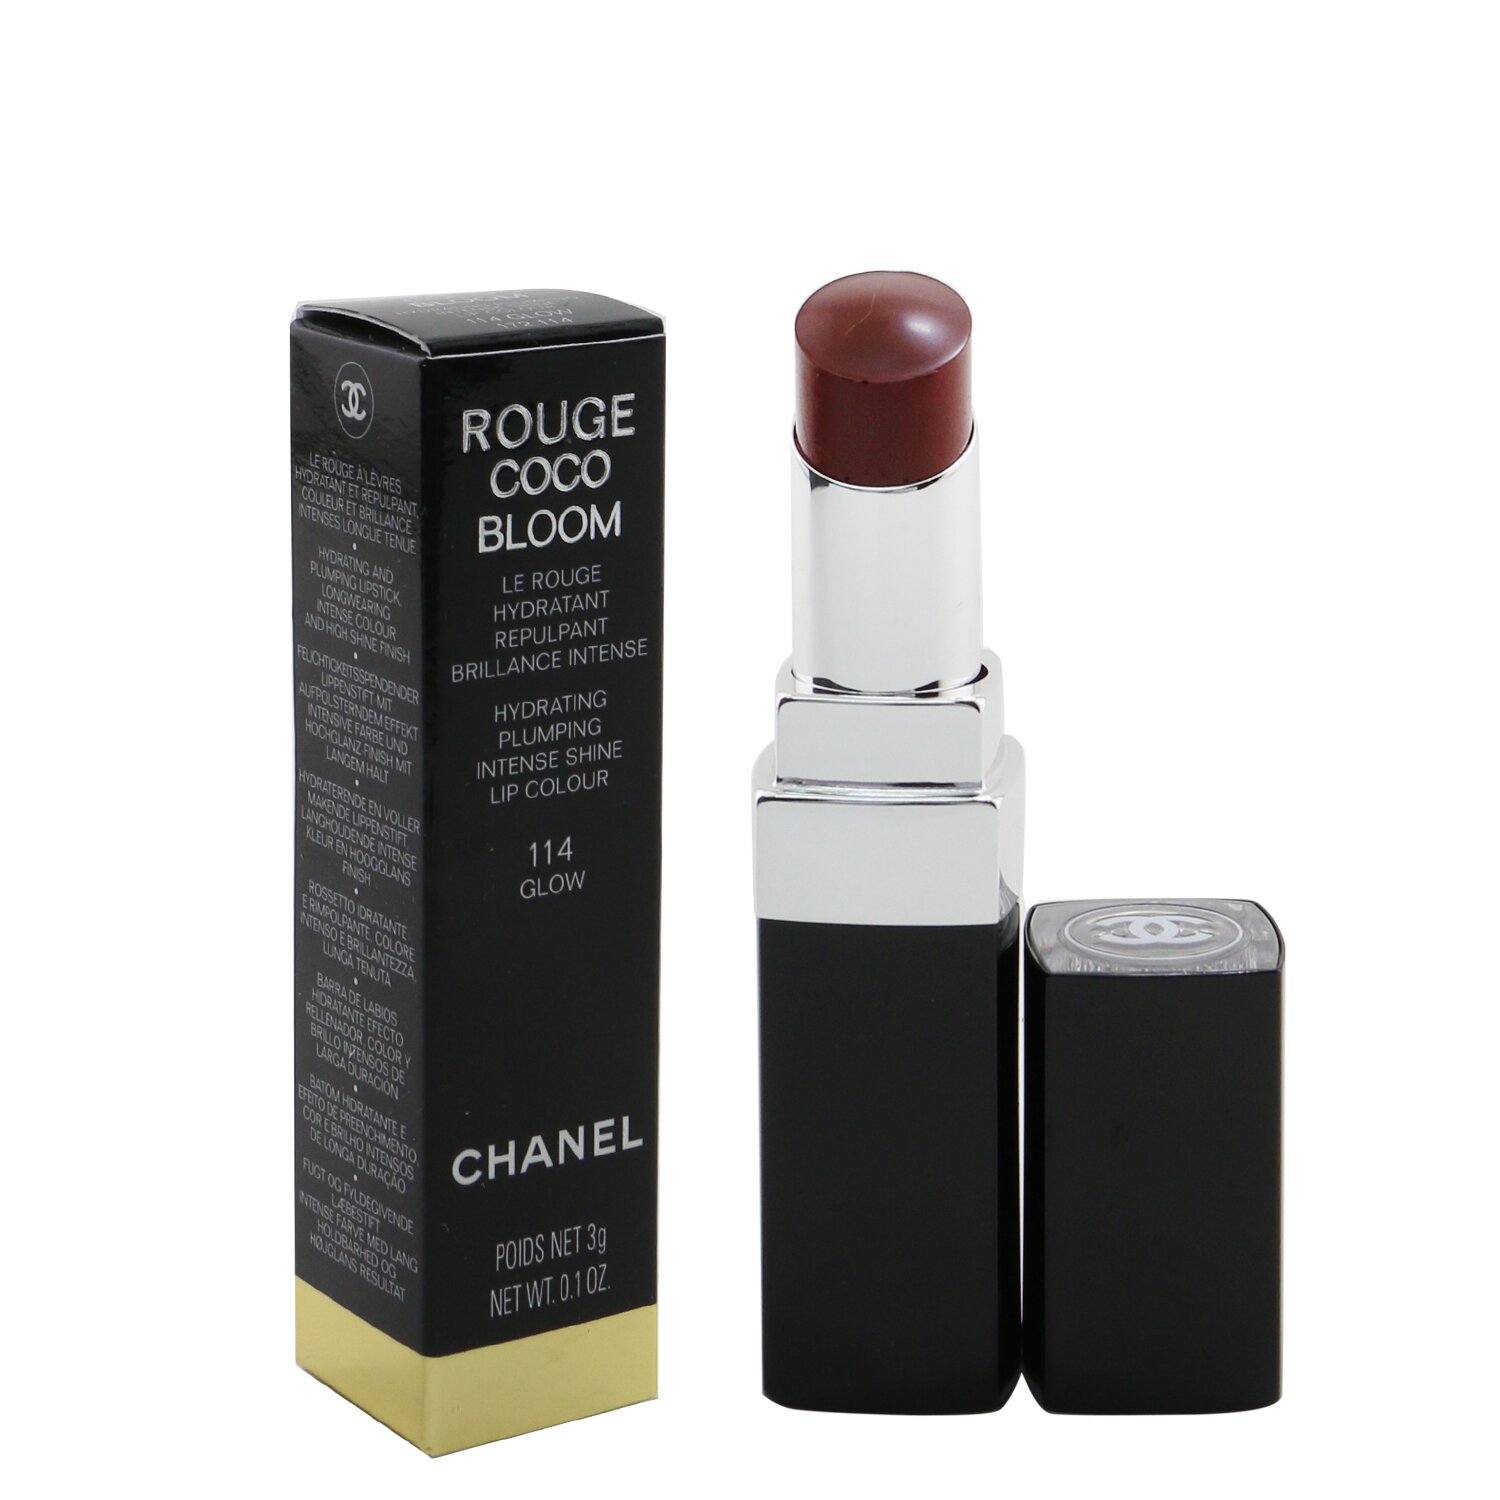 Chanel Rouge Coco Bloom Hydrating Plumping Intense Shine Lip Colour - # Glow 3g/0.1oz | KOODING